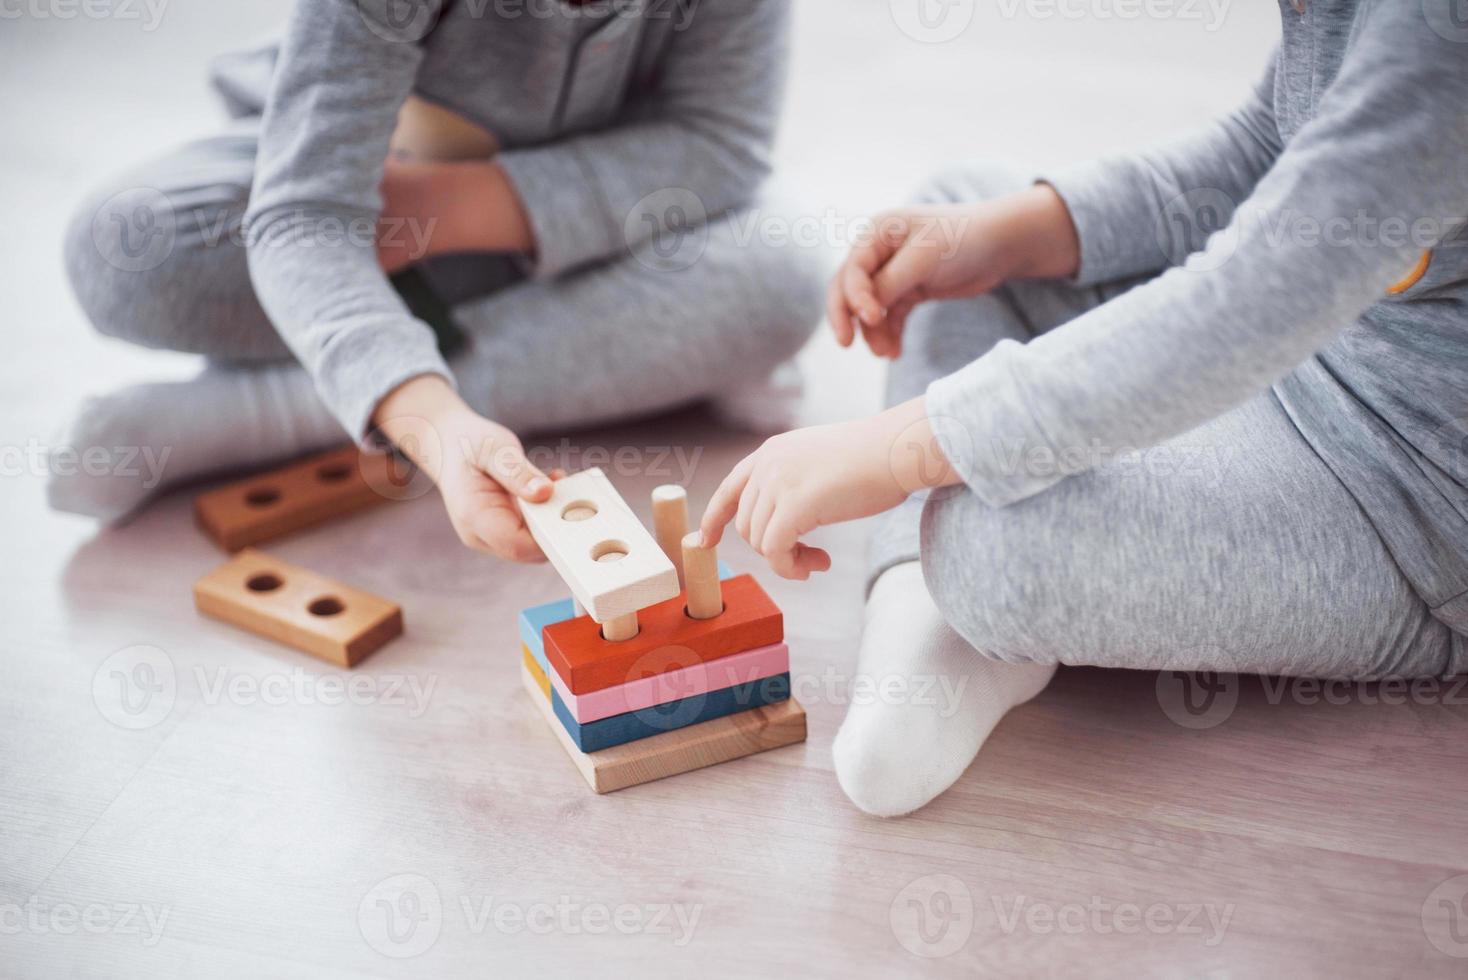 Children play with a toy designer on the floor of the children's room. Two kids playing with colorful blocks. Kindergarten educational games photo